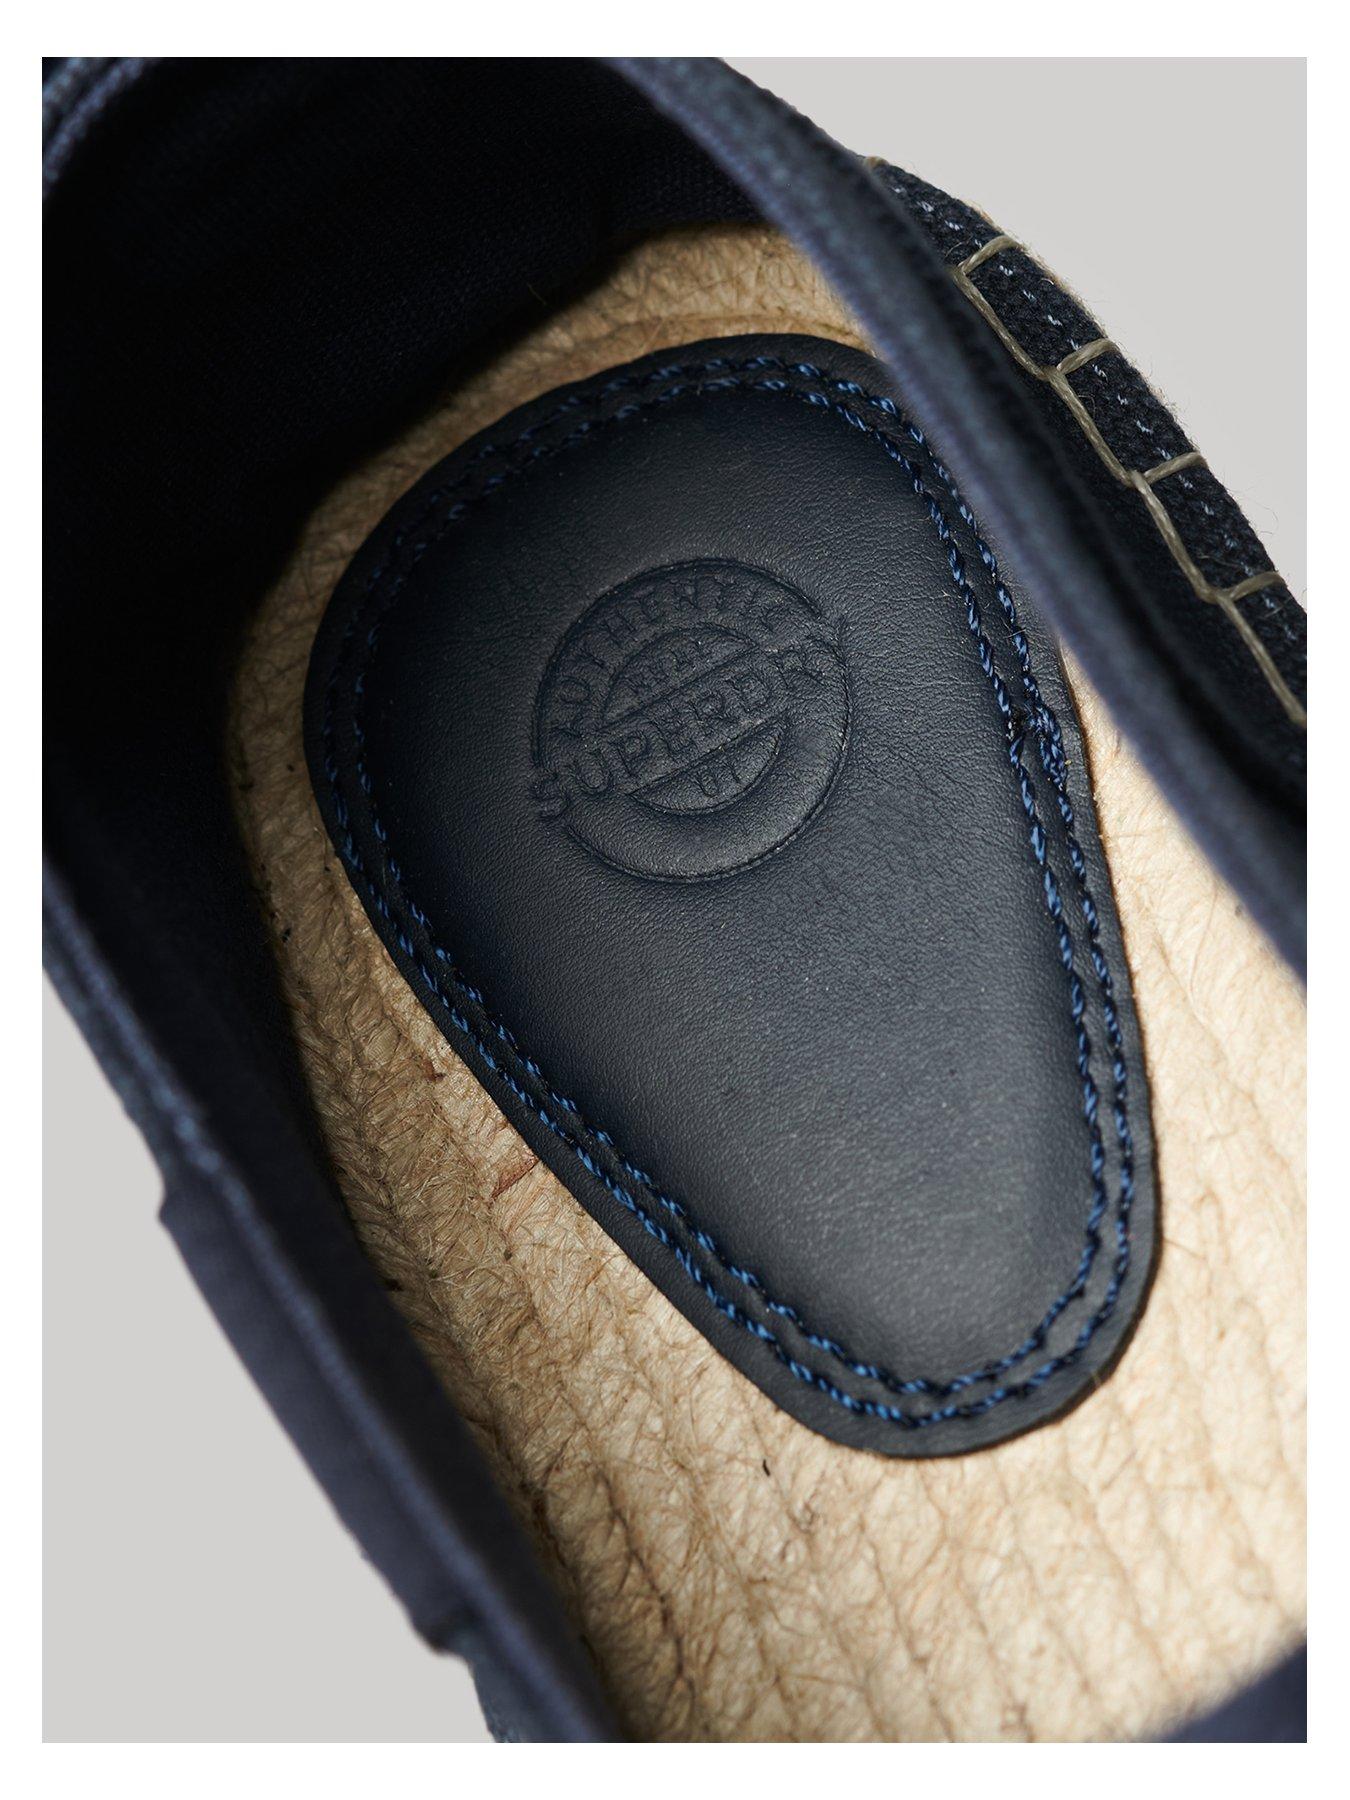 Superdry Canvas Espadrille Shoes - Navy | Very.co.uk